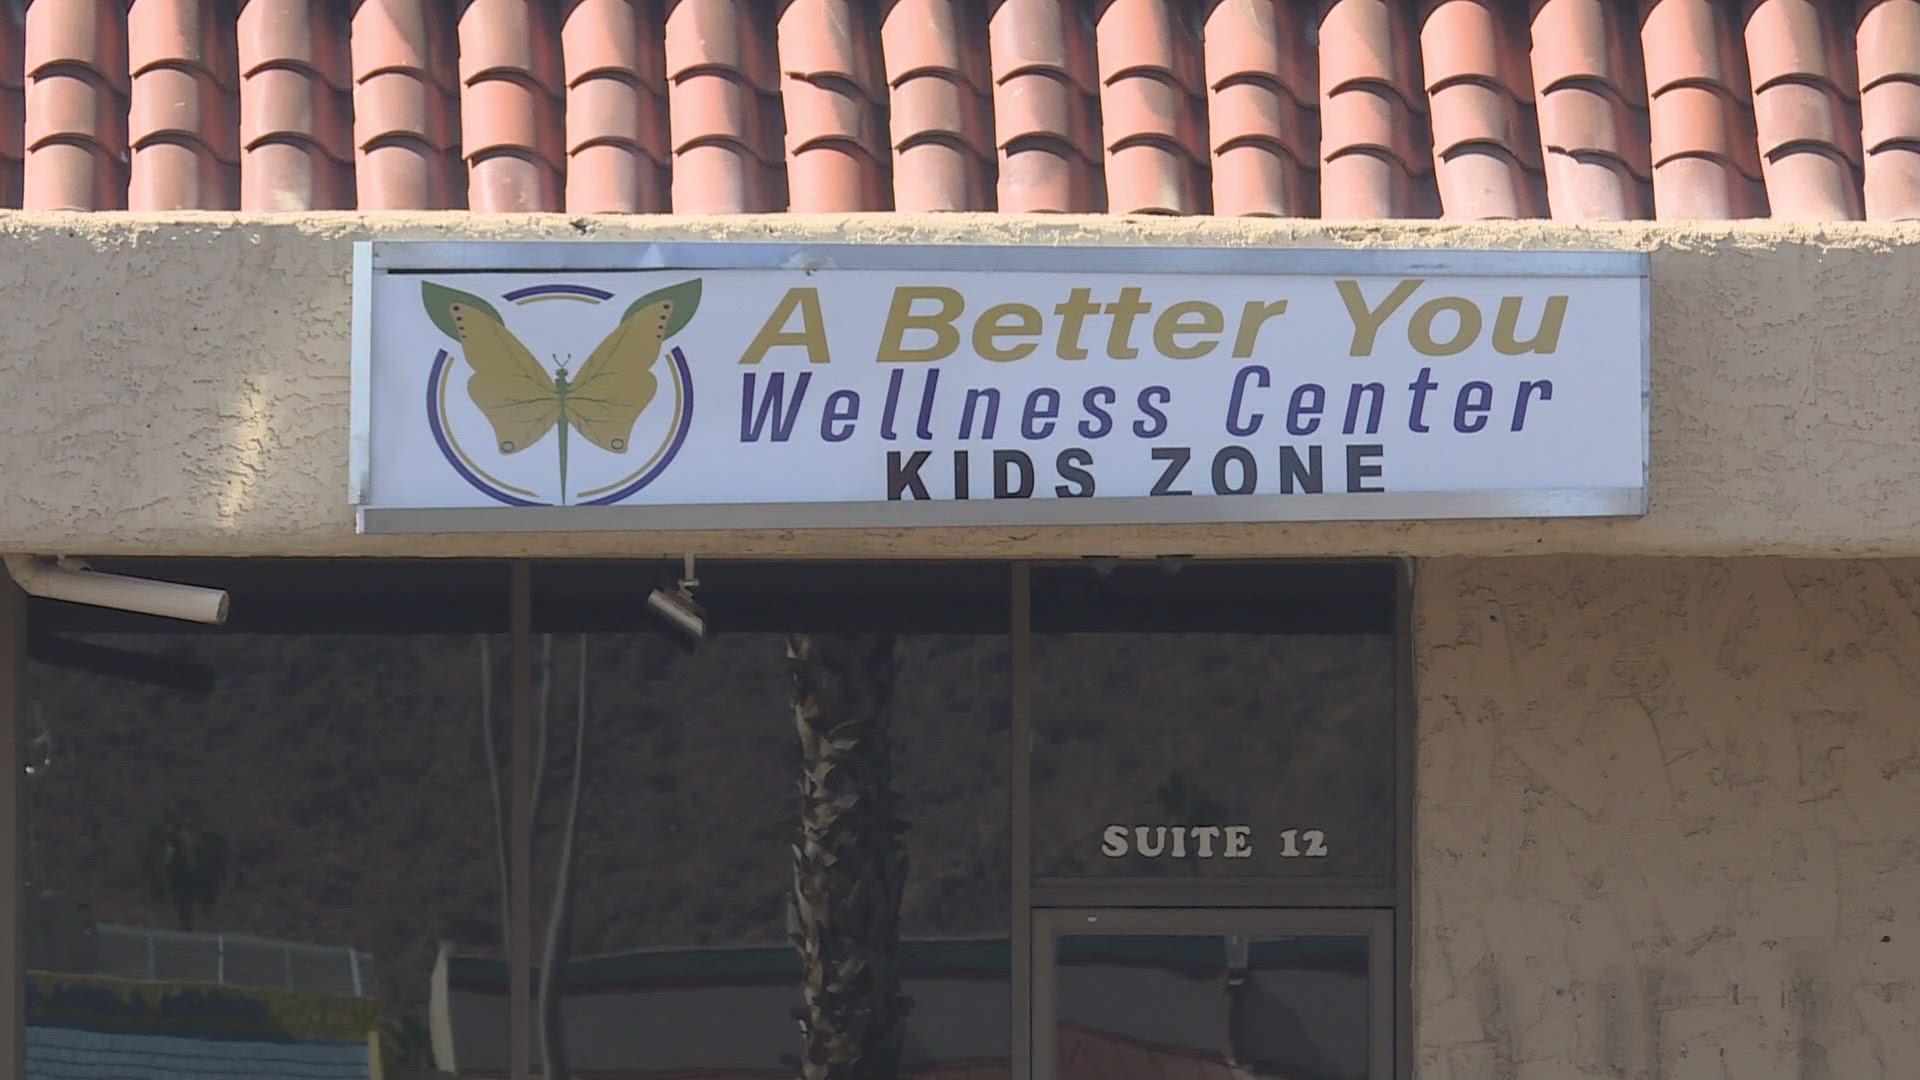 Three people are facing 19 felony fraud-related counts each for allegedly billing for health services at A Better You Wellness Center in Phoenix.